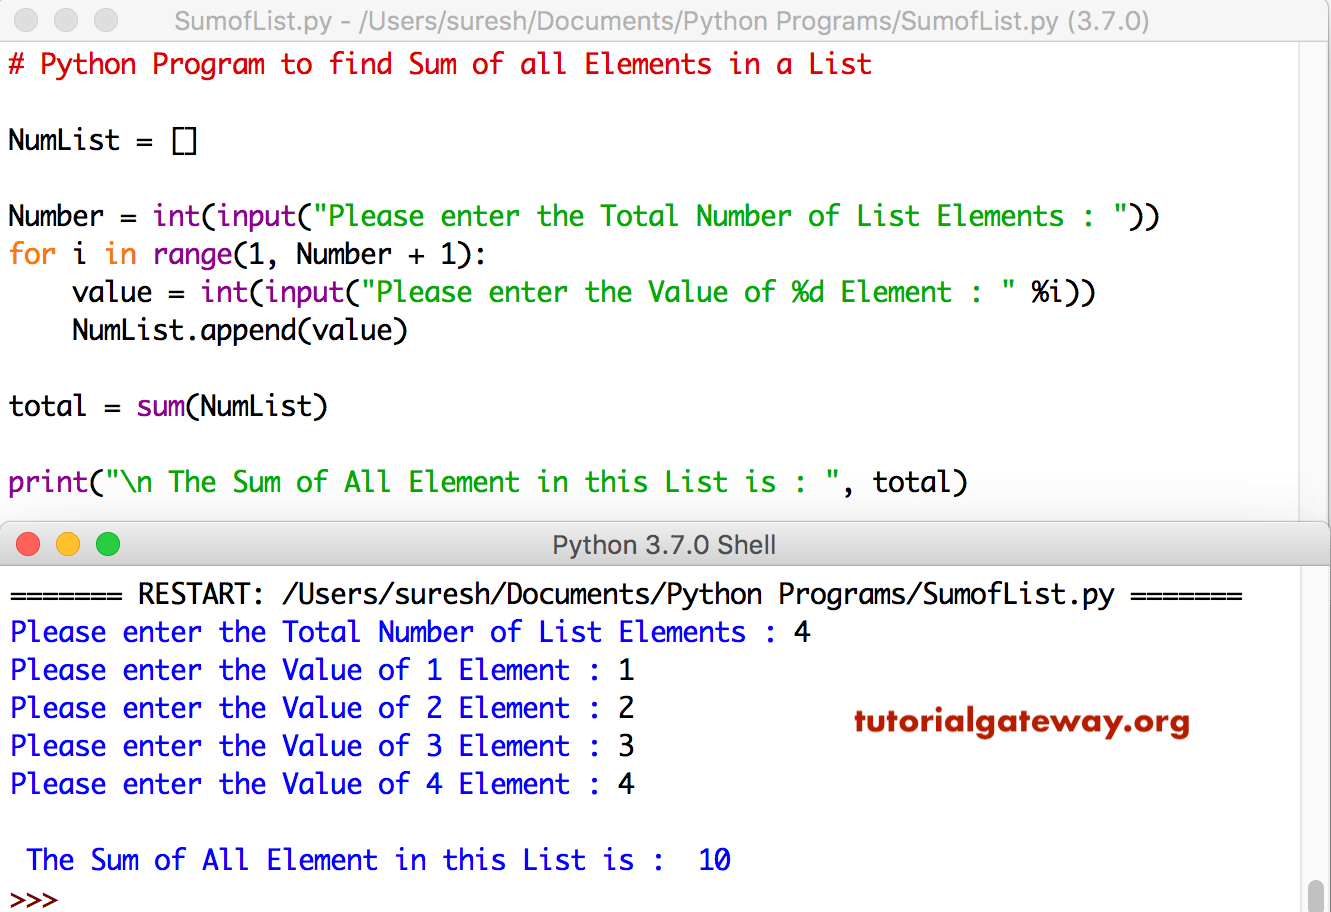 Python Program to find Sum of Elements in a List 1